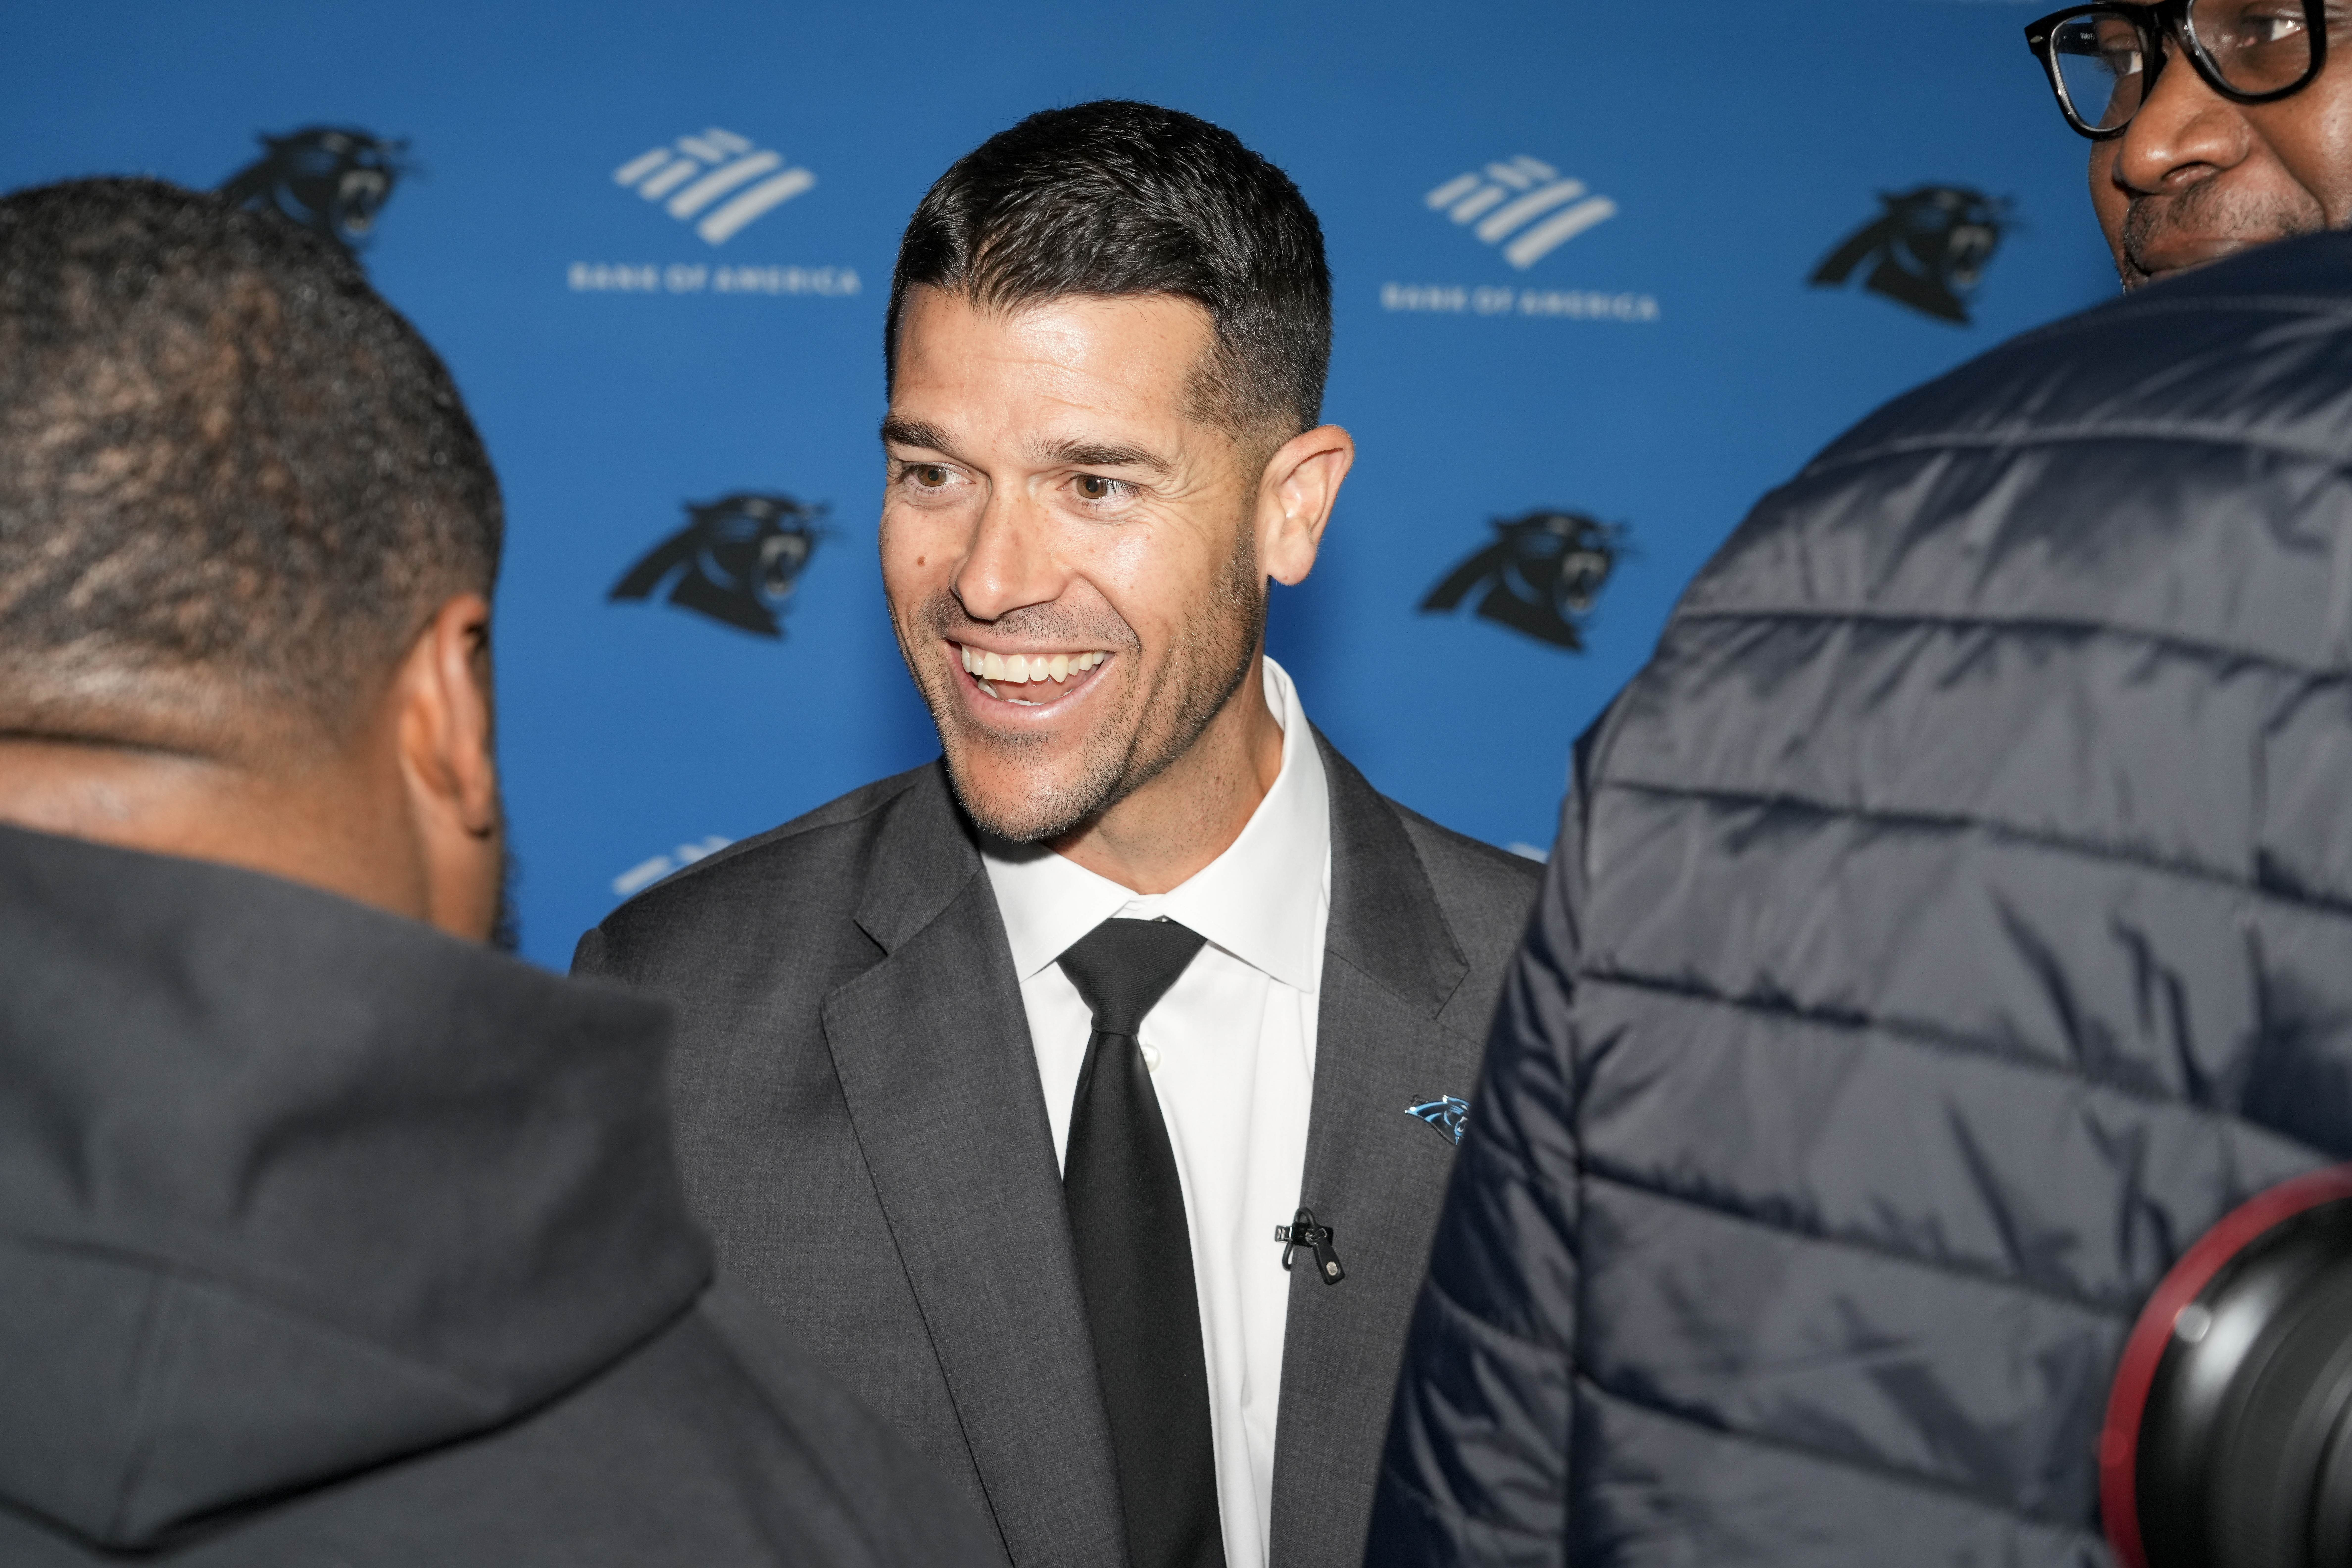 NFL: Carolina Panthers Head Coach Dave Canales Introductory Press Conference